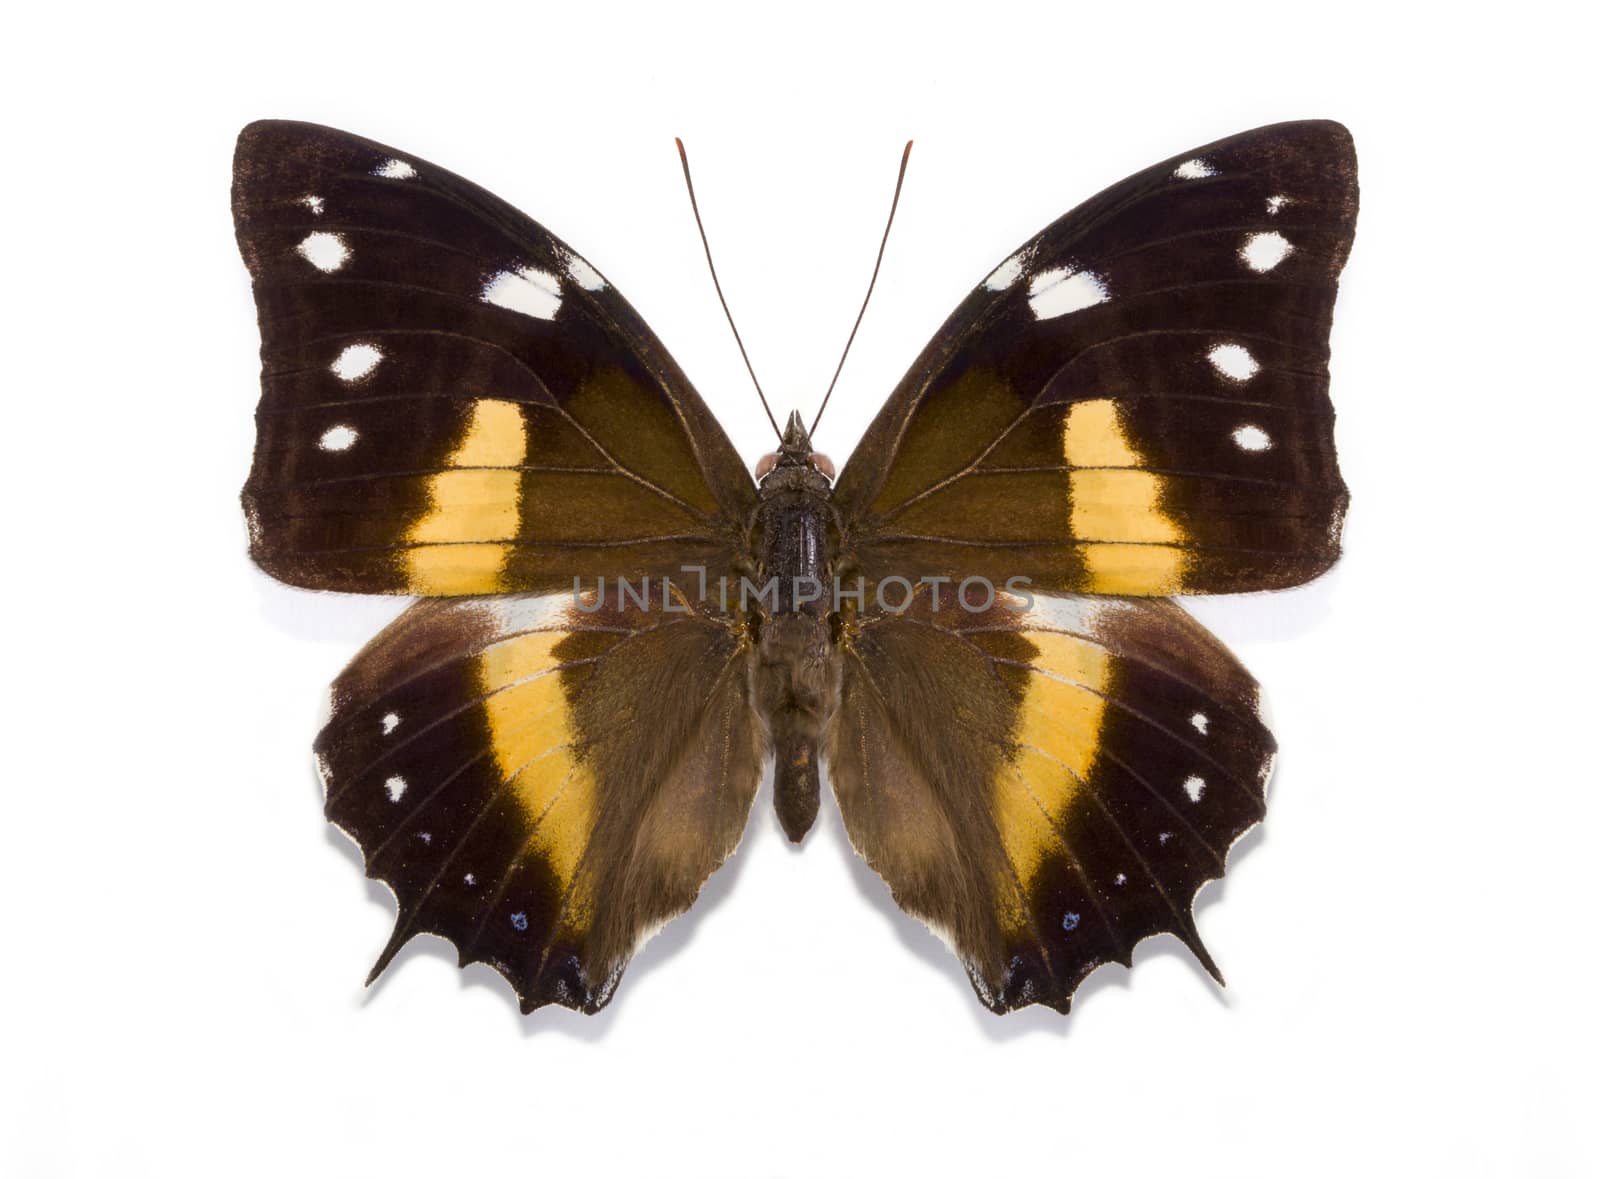 tropical butterfly Baeotus deucalion on a white background